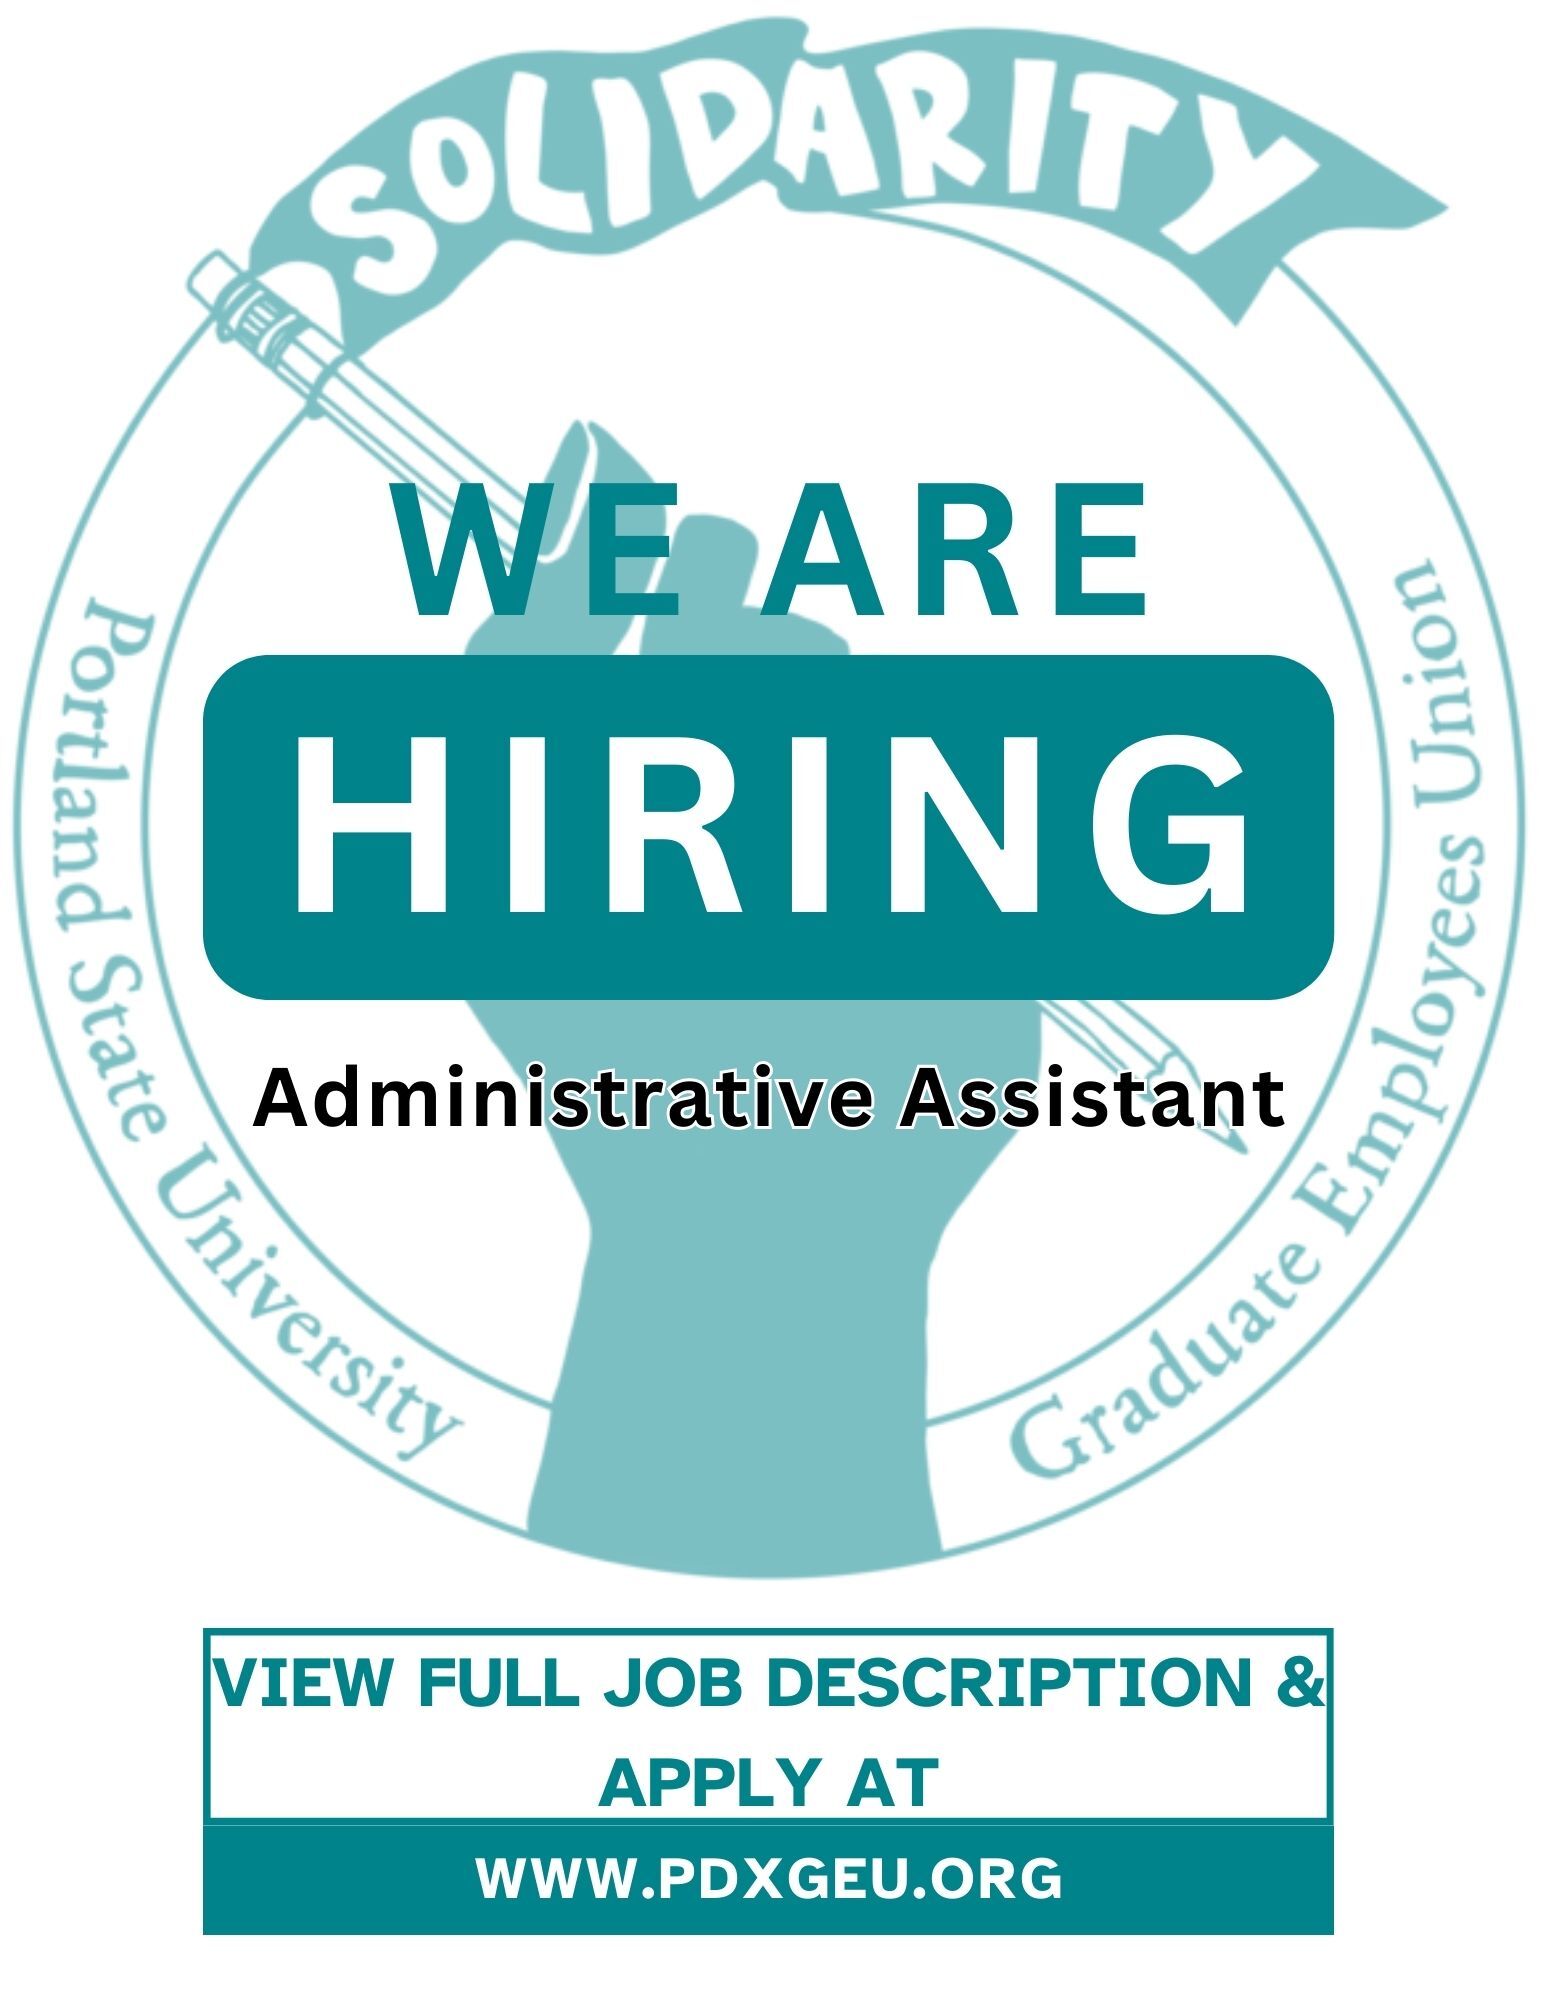 GEU is hiring a 0.3 FTE Administrative Assistant